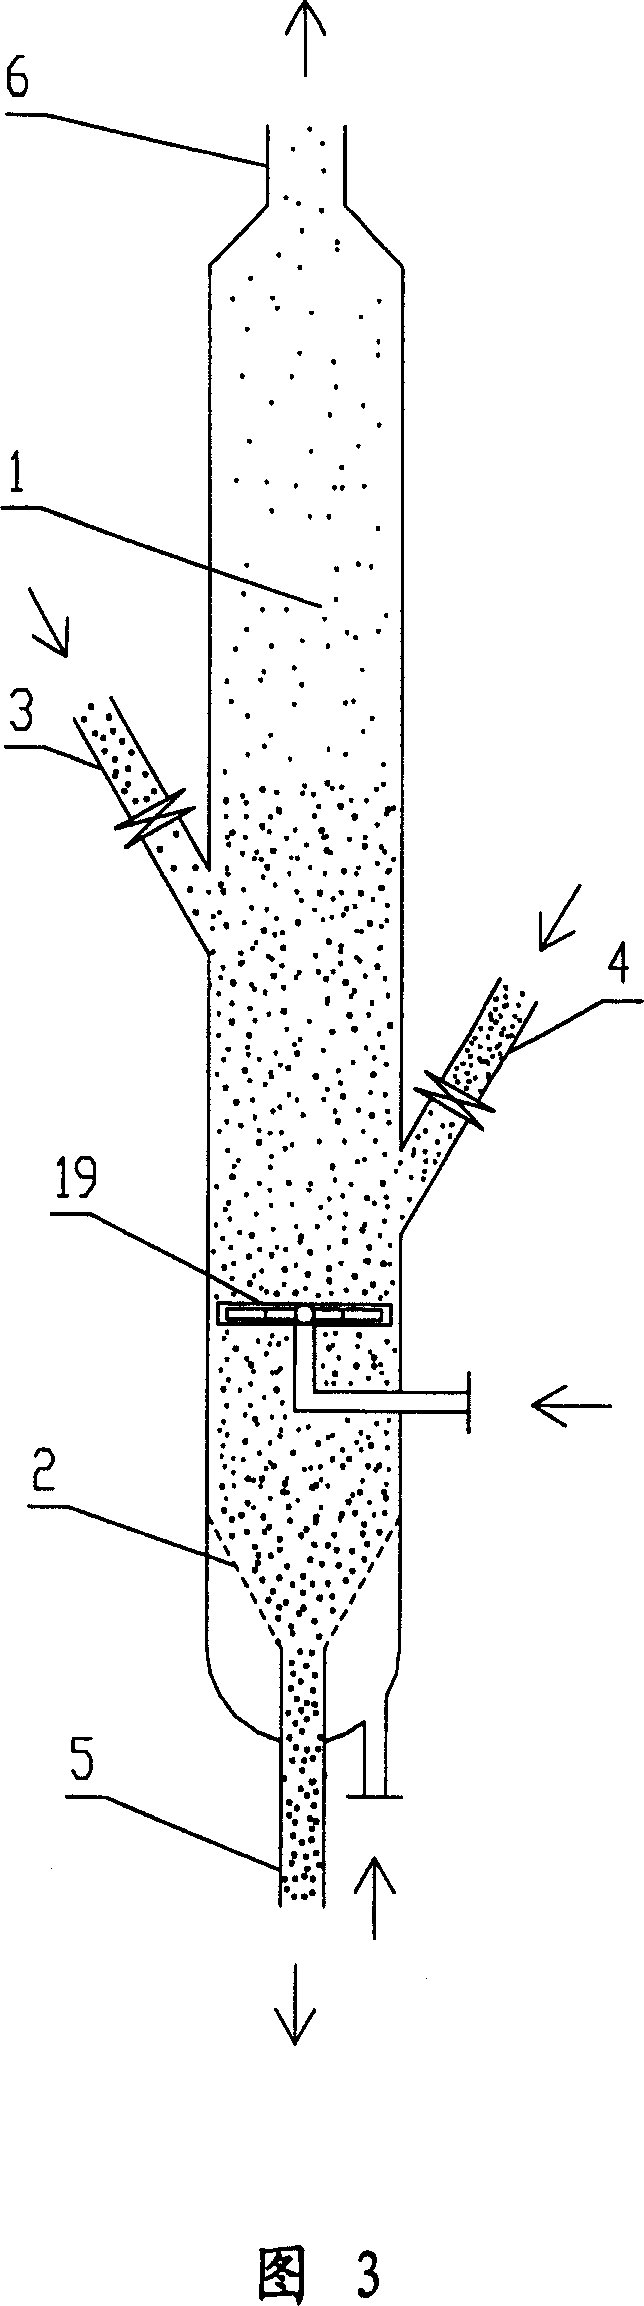 Gas-solid fluidized coupling equipment and coupling method for particle mixing-classifying by utilizing same